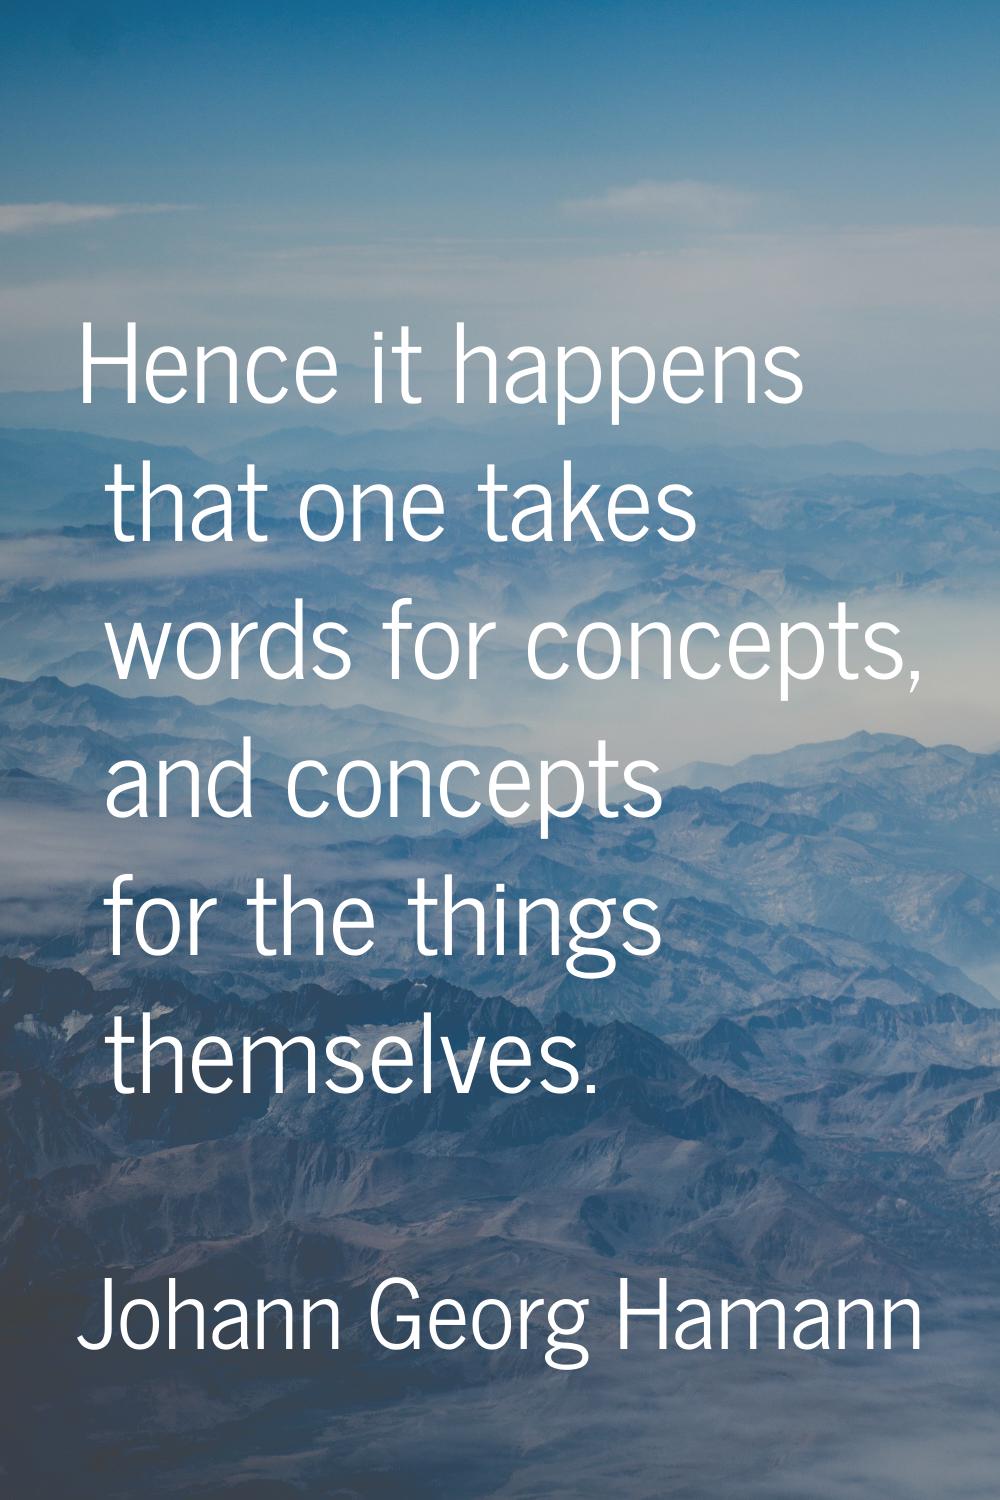 Hence it happens that one takes words for concepts, and concepts for the things themselves.